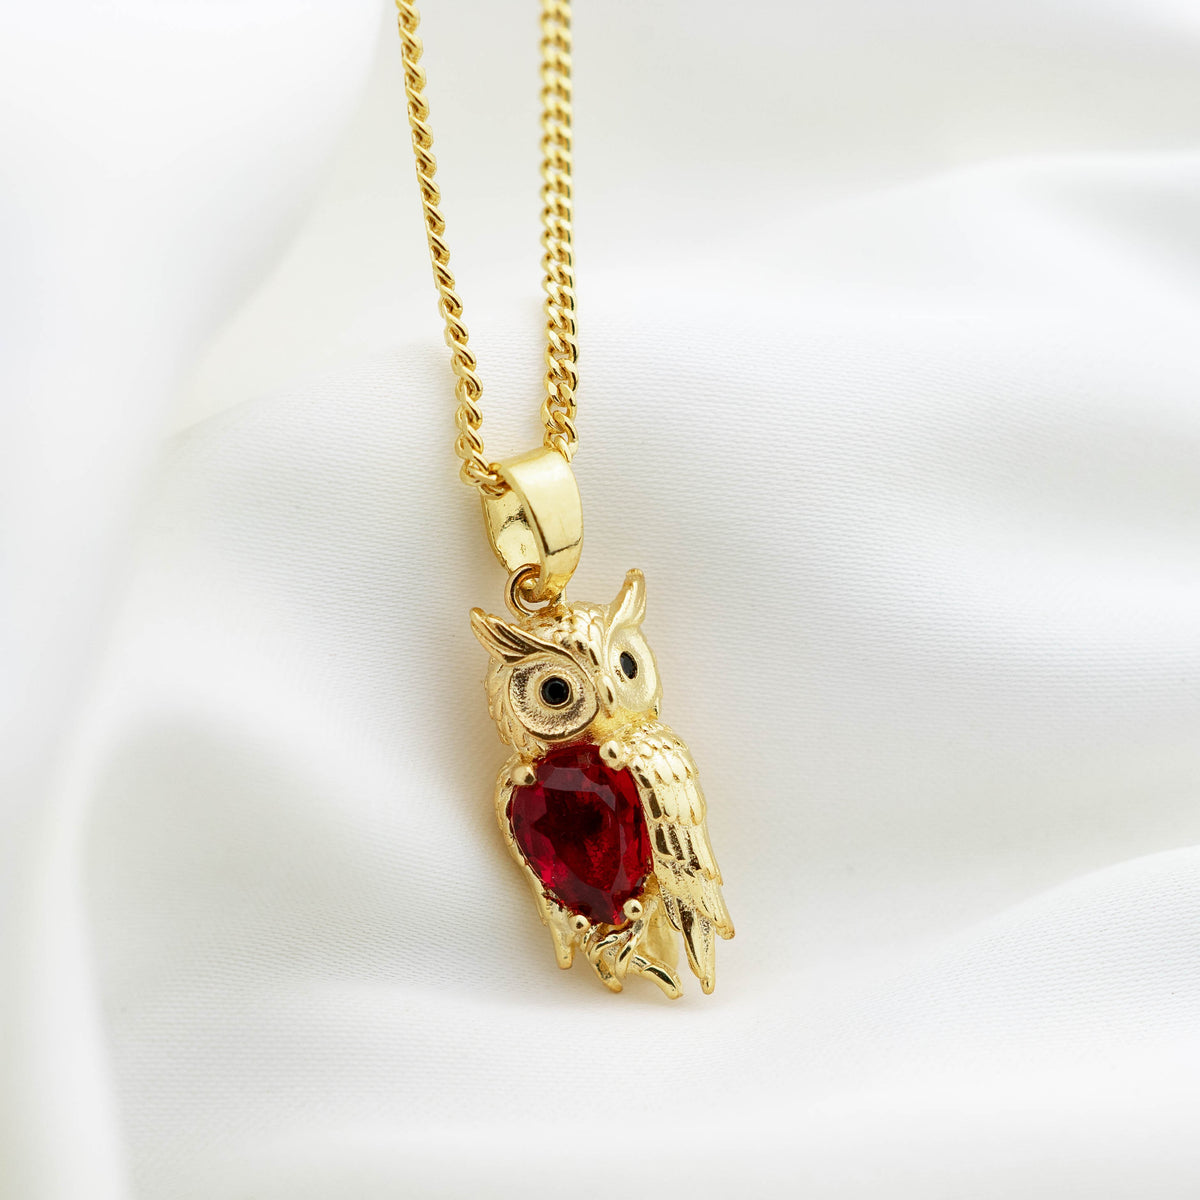 Golden Ruby Owl Necklace